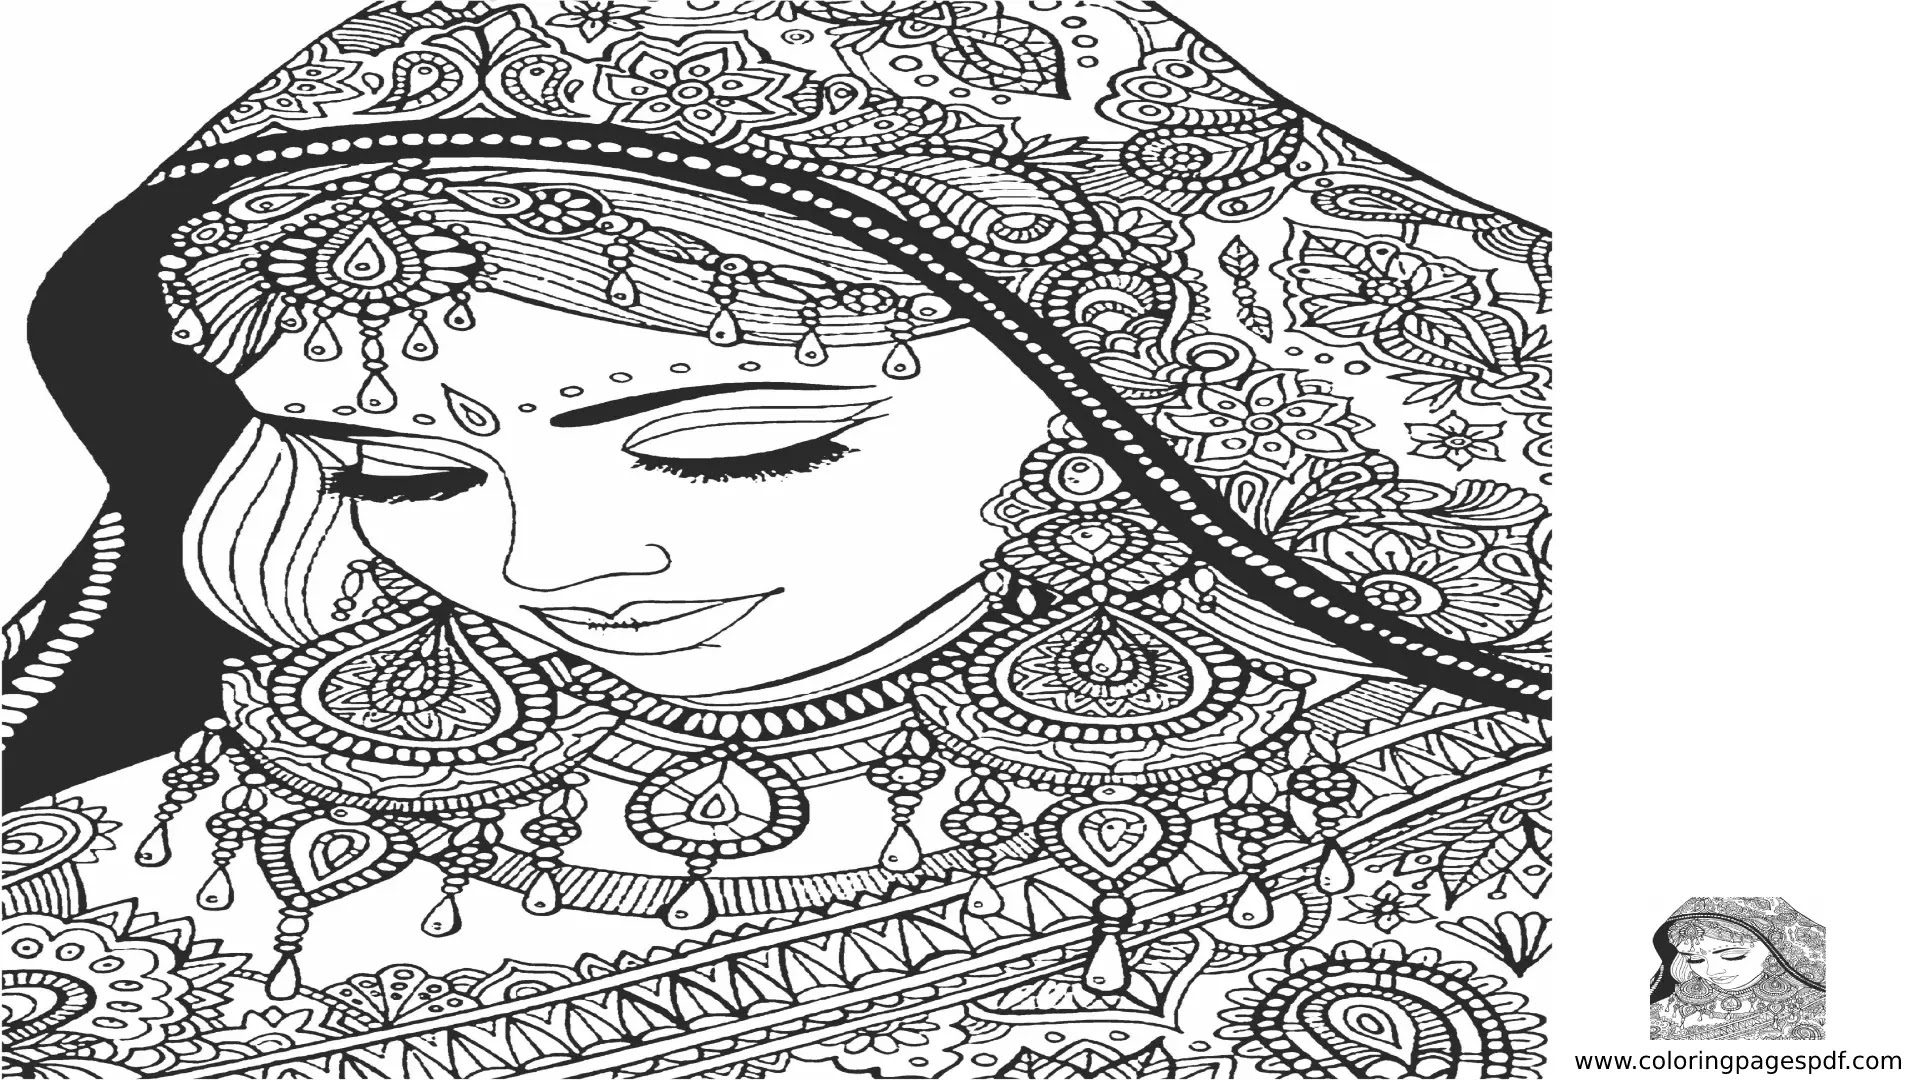 Coloring Pages Of A Woman With An Arabic Wedding Dress